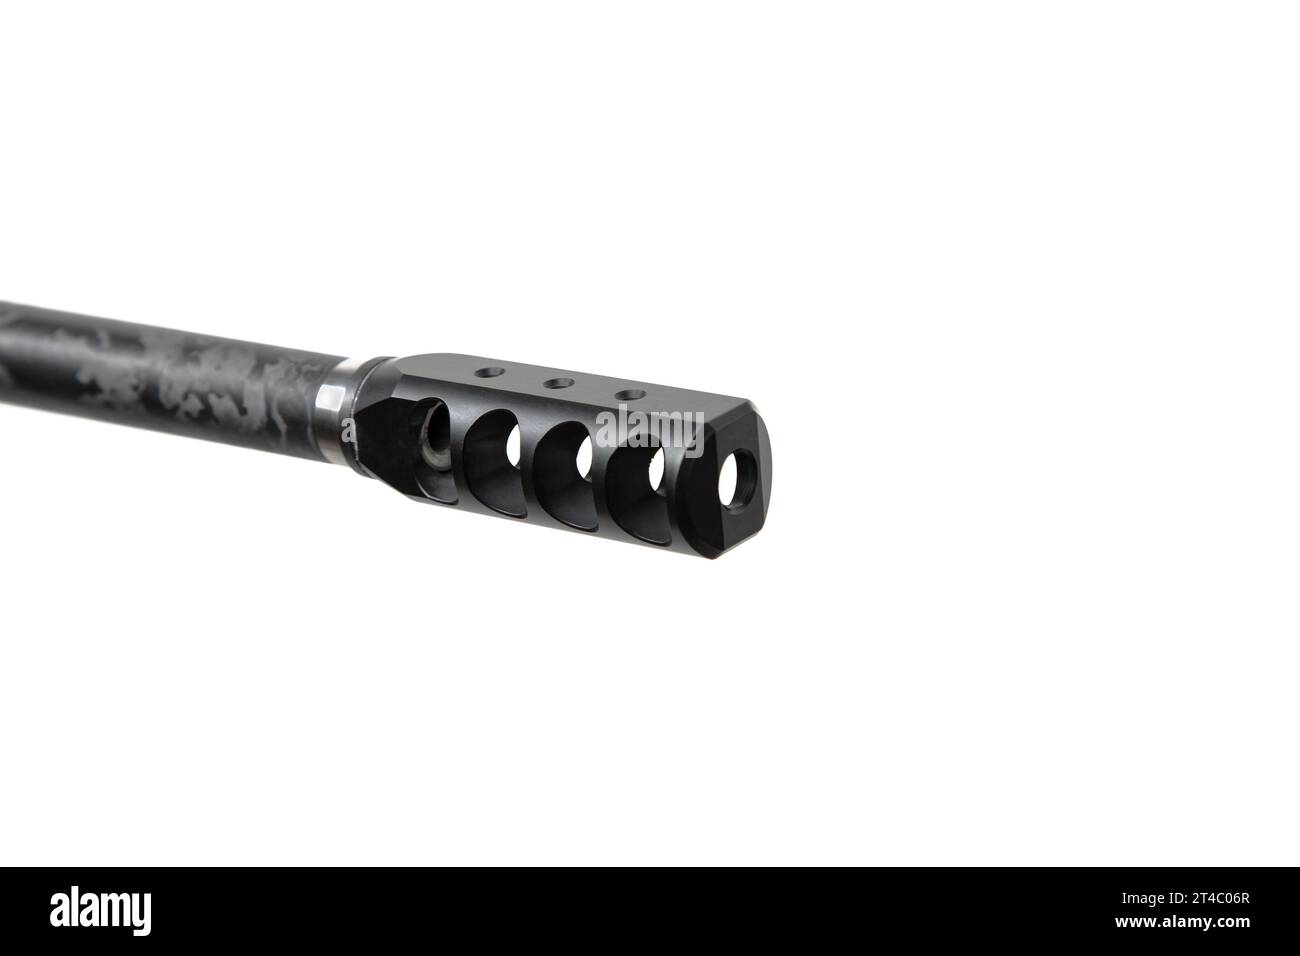 Muzzle brake compensator. Device for compensating for barrel toss. Isolate on a white background. Stock Photo